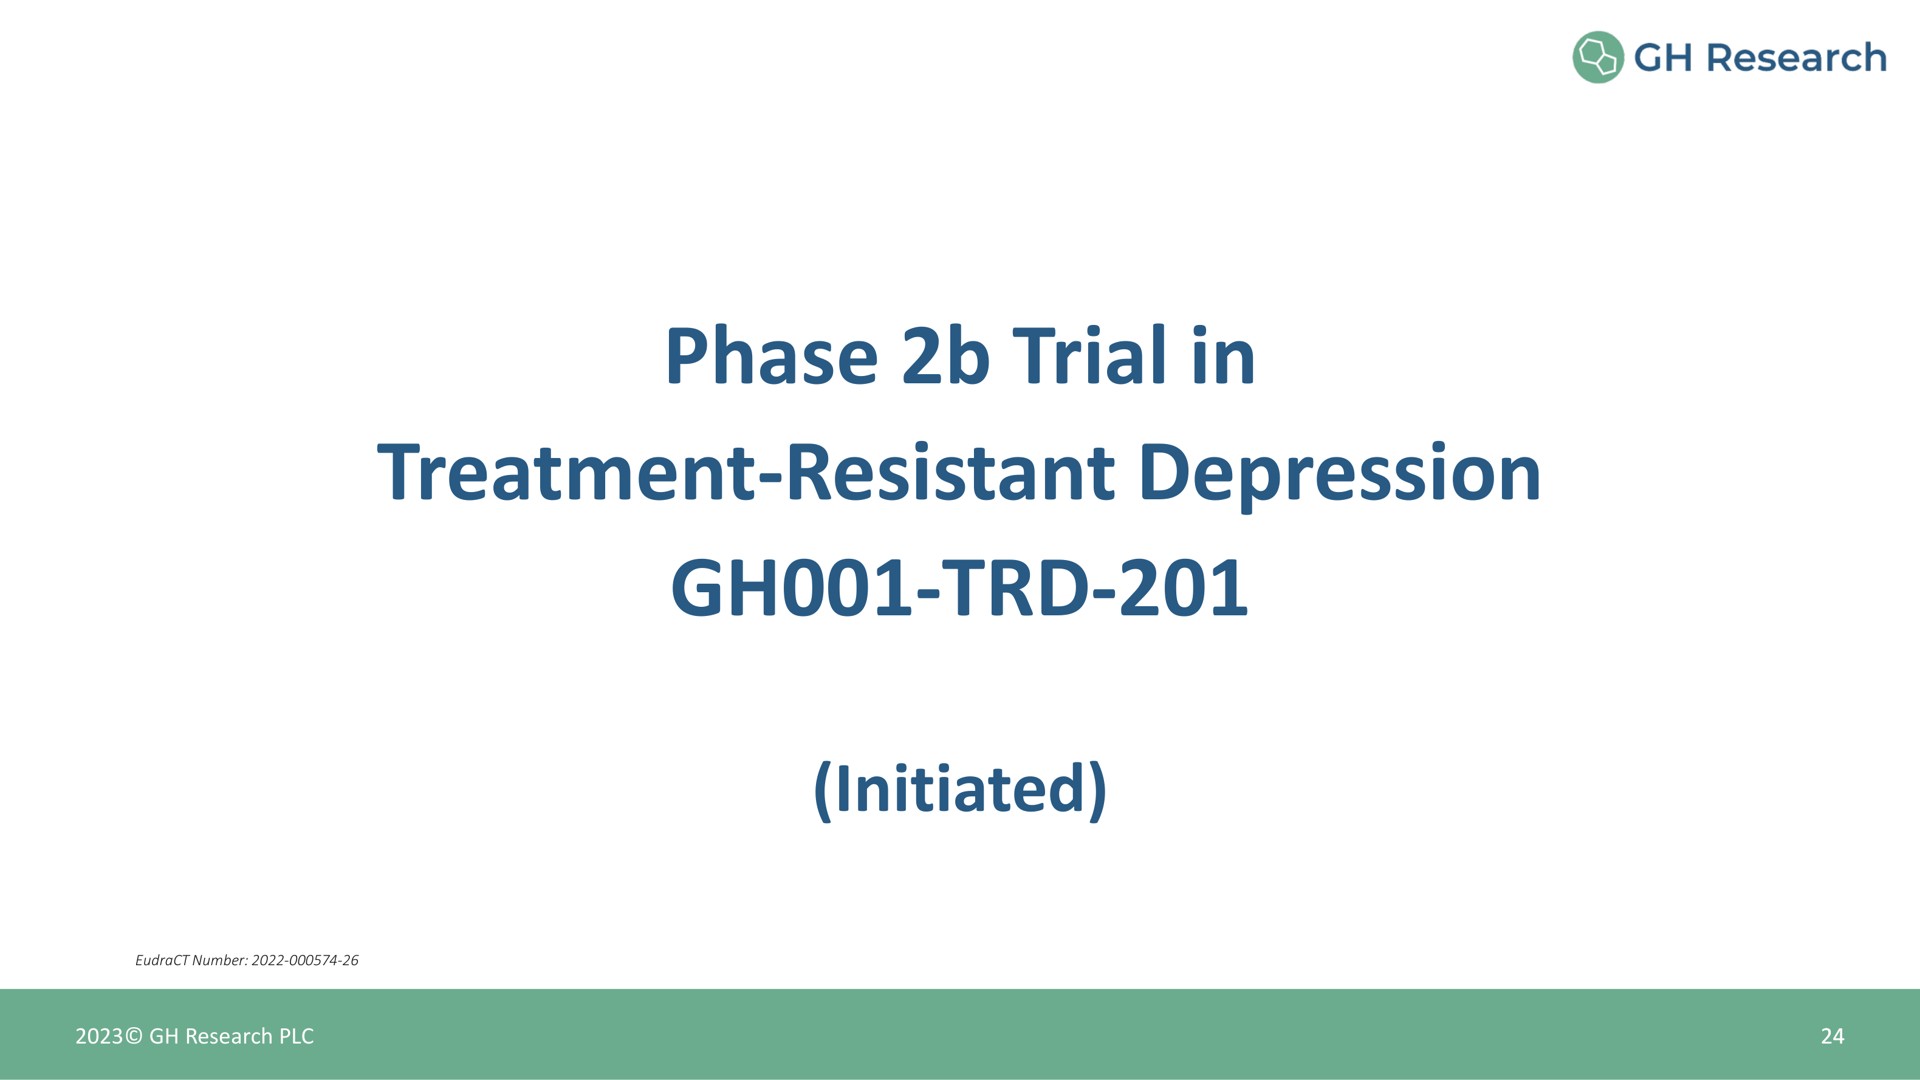 phase trial in treatment resistant depression initiated | GH Research